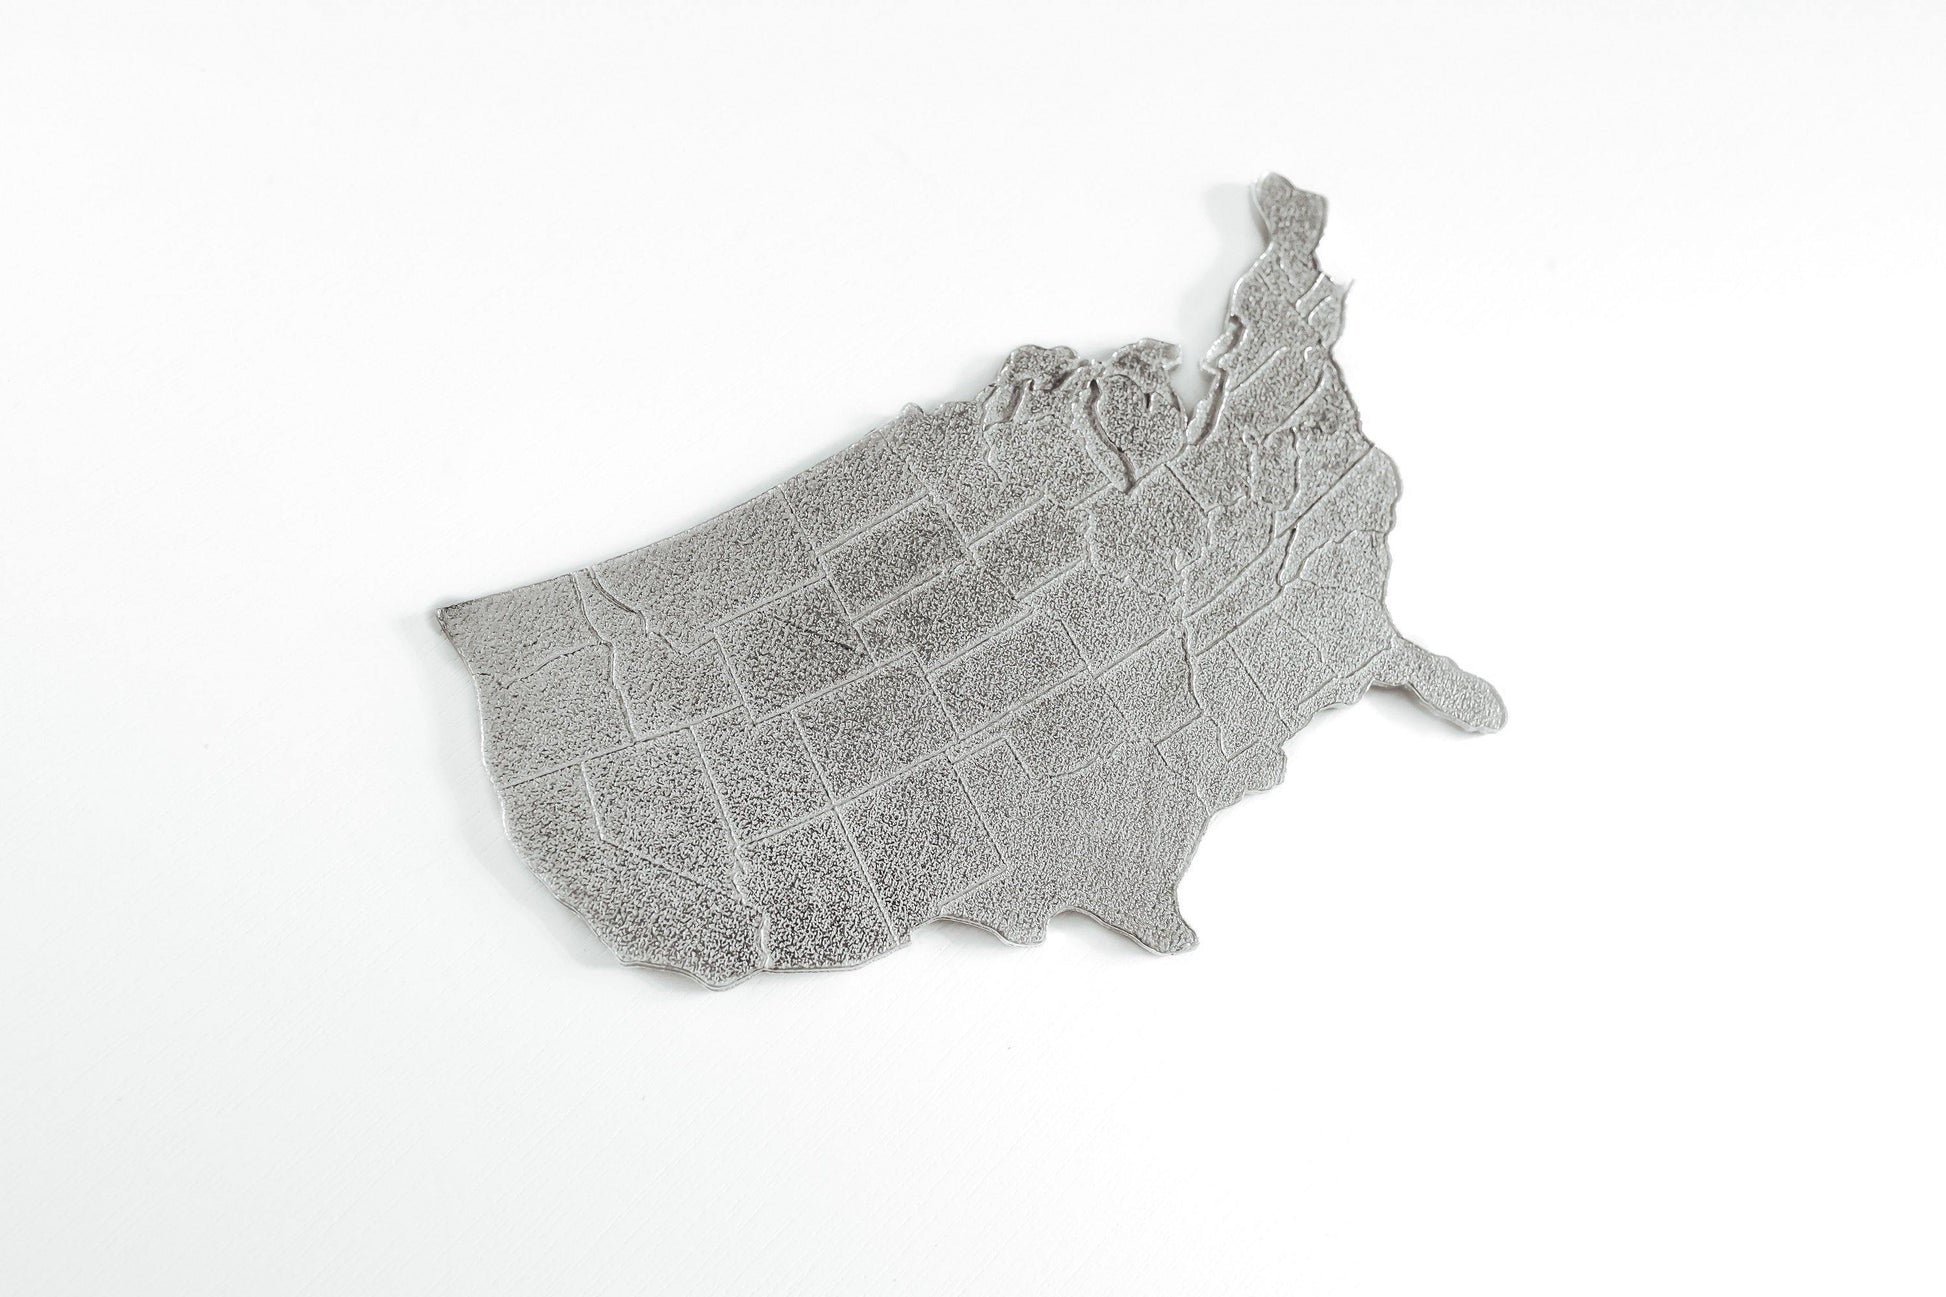 Handmade United States Travel Paperweight Pewter - House of Morgan Pewter